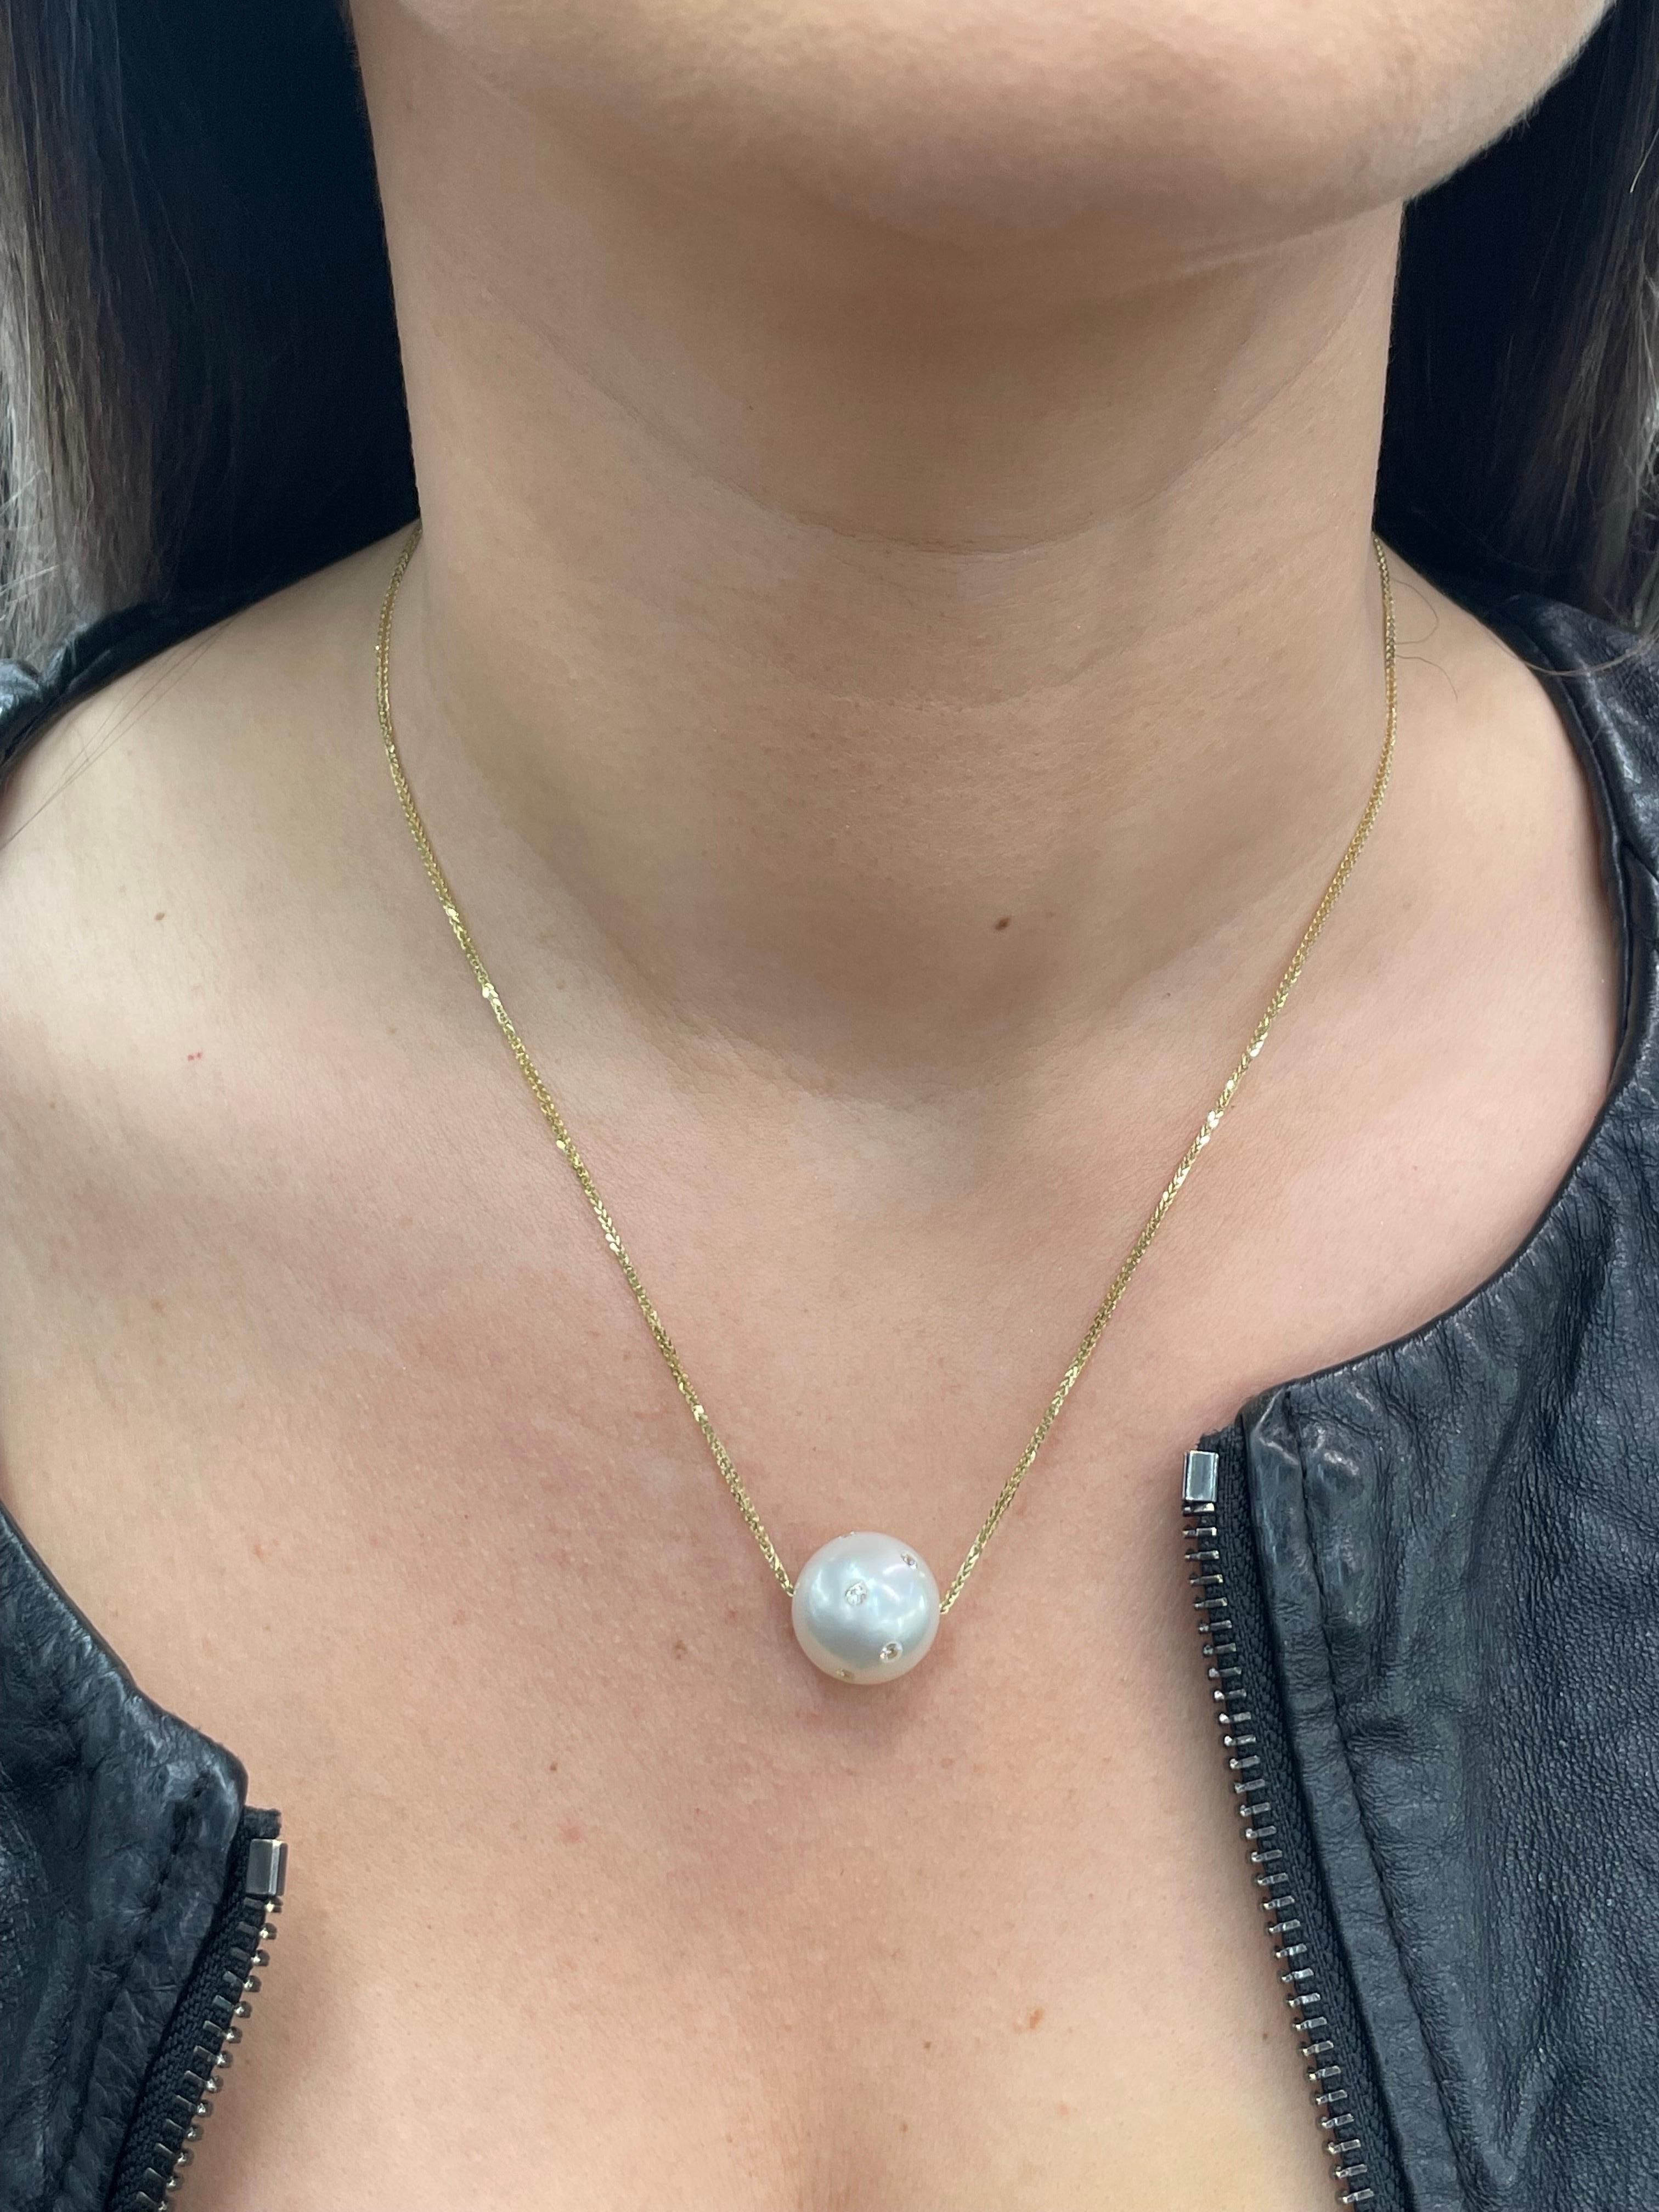 18 Karat Yellow gold slider pendant necklace featuring one South Sea Pearl measuring 15-16 mm with shattered round brilliants weighing 0.25 carats.
Available in different pearls and gold colors. 
DM for more info!